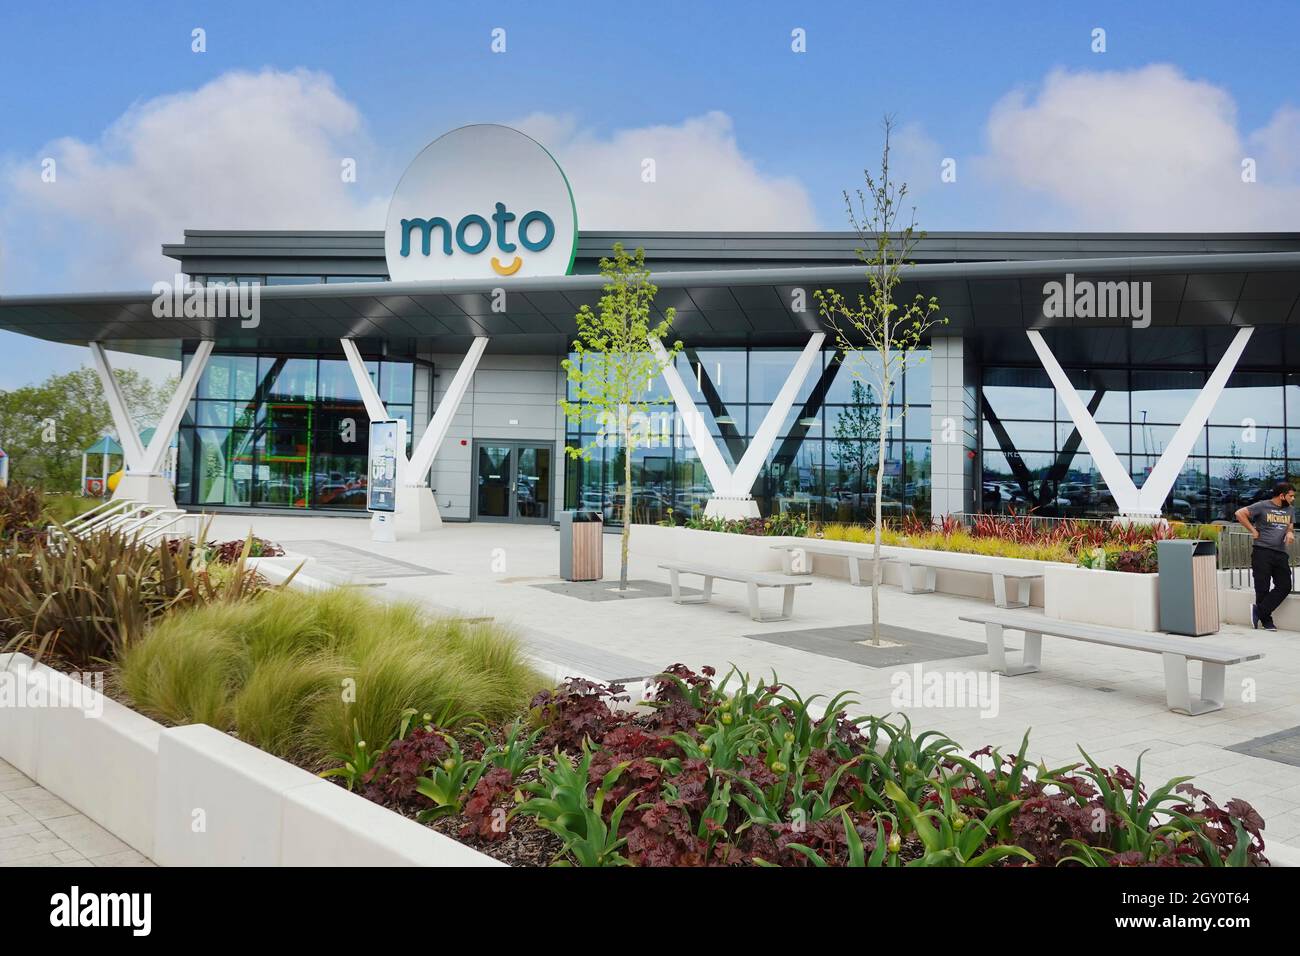 Outdoor seating in landscaping & flower planting at modern design of new Moto service station off M6 motorway Rugby junction Warwickshire England UK Stock Photo